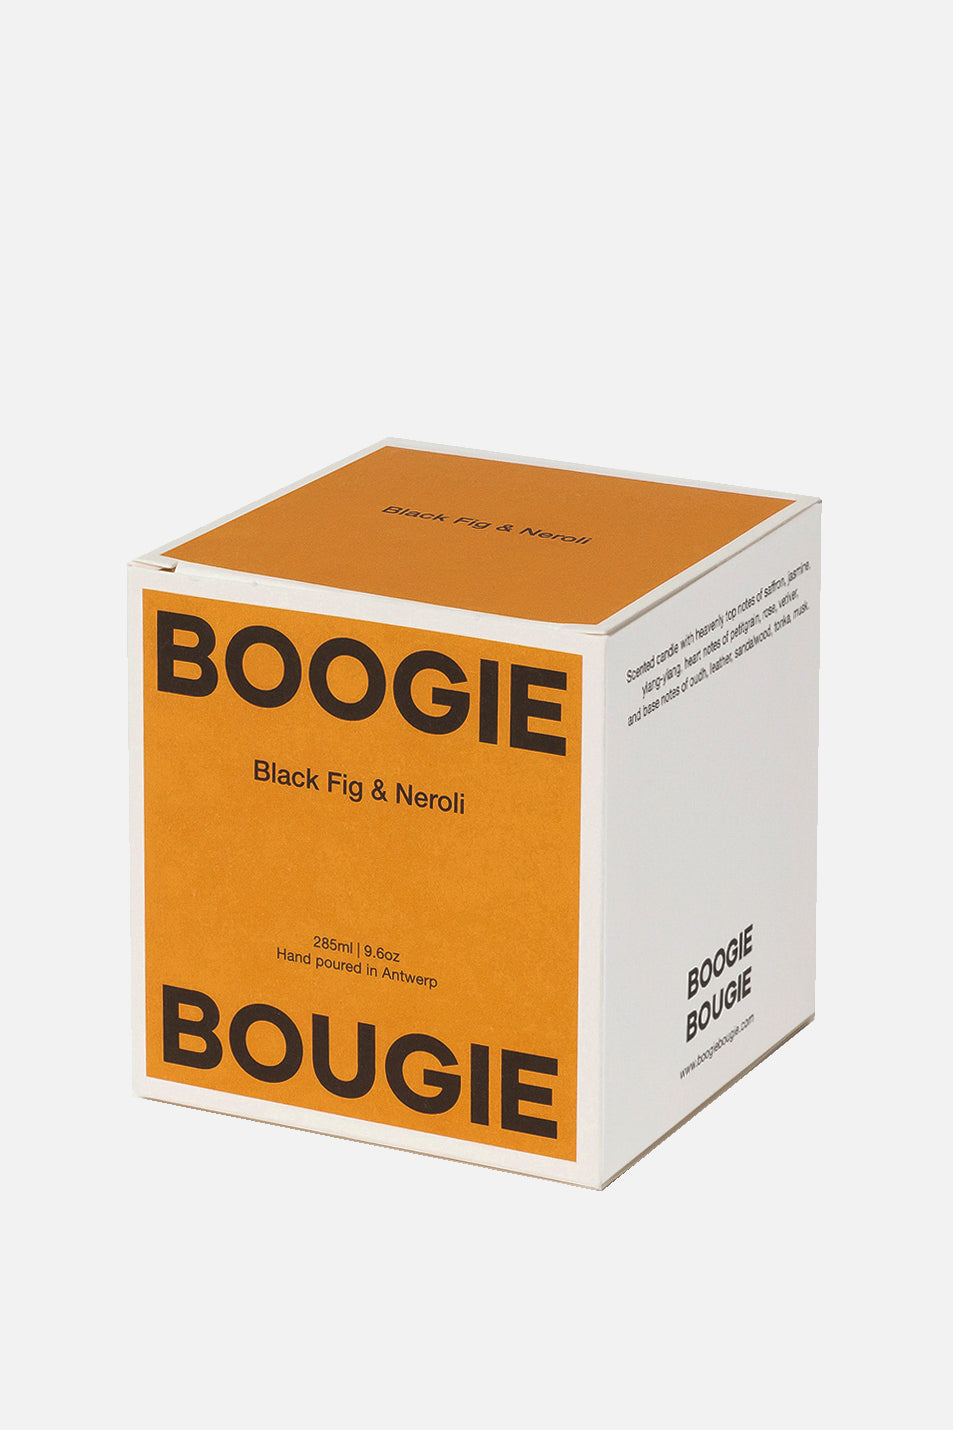 Scented Candle Black Fig & Neroli-Boogie Bougie-KIOSK48TH